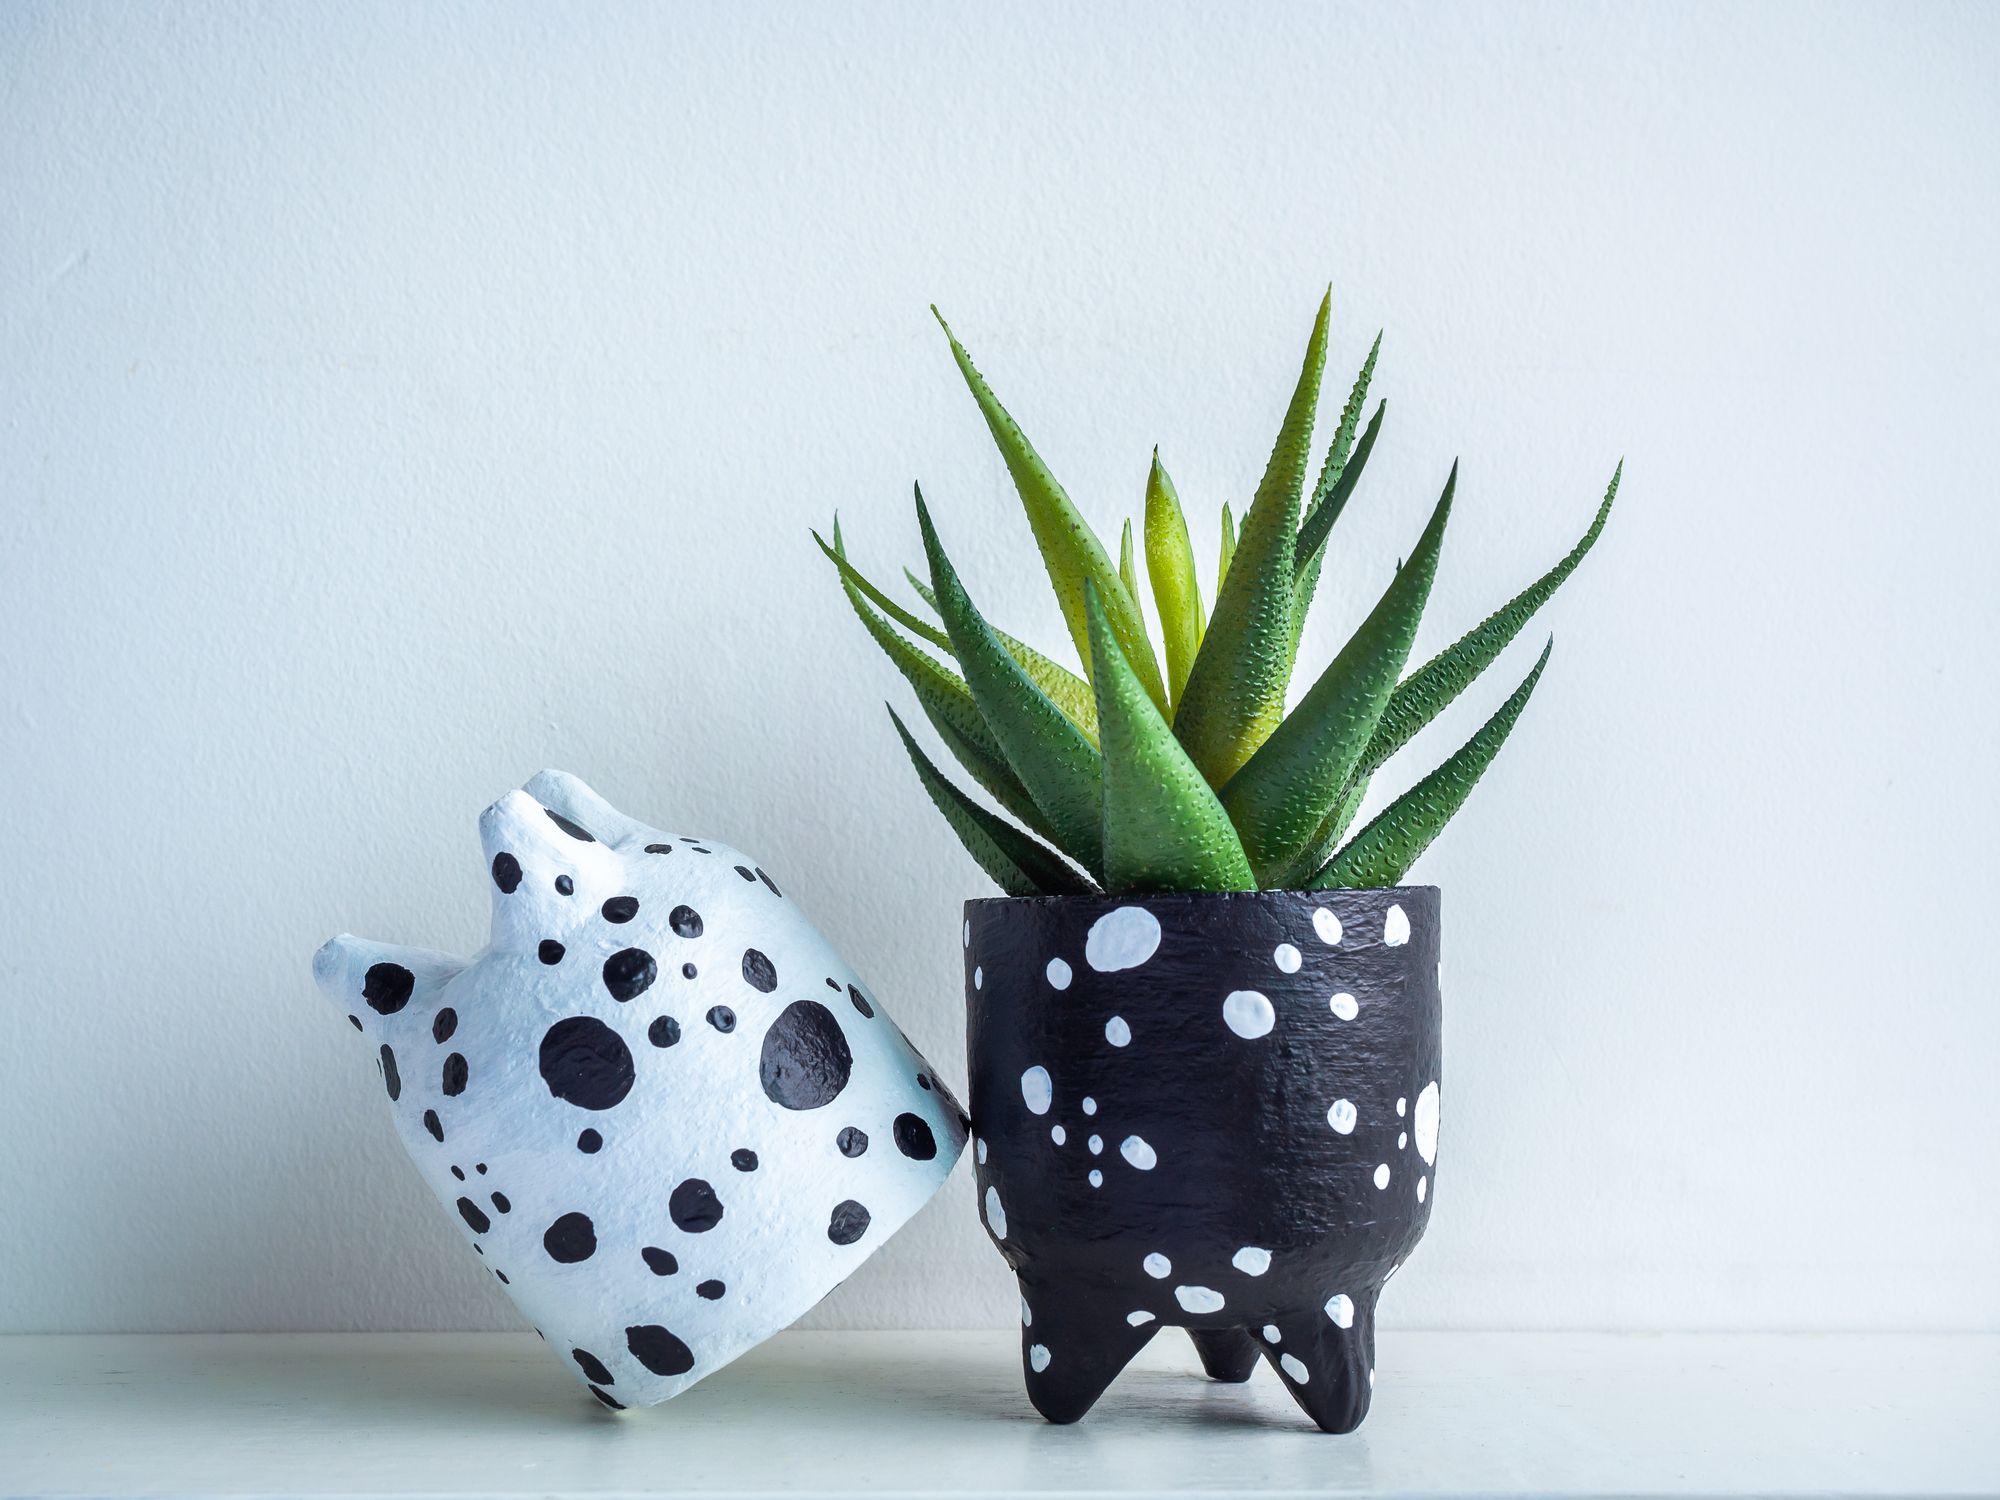 25 Easy Diy Planters - How To Make Your Own Planters